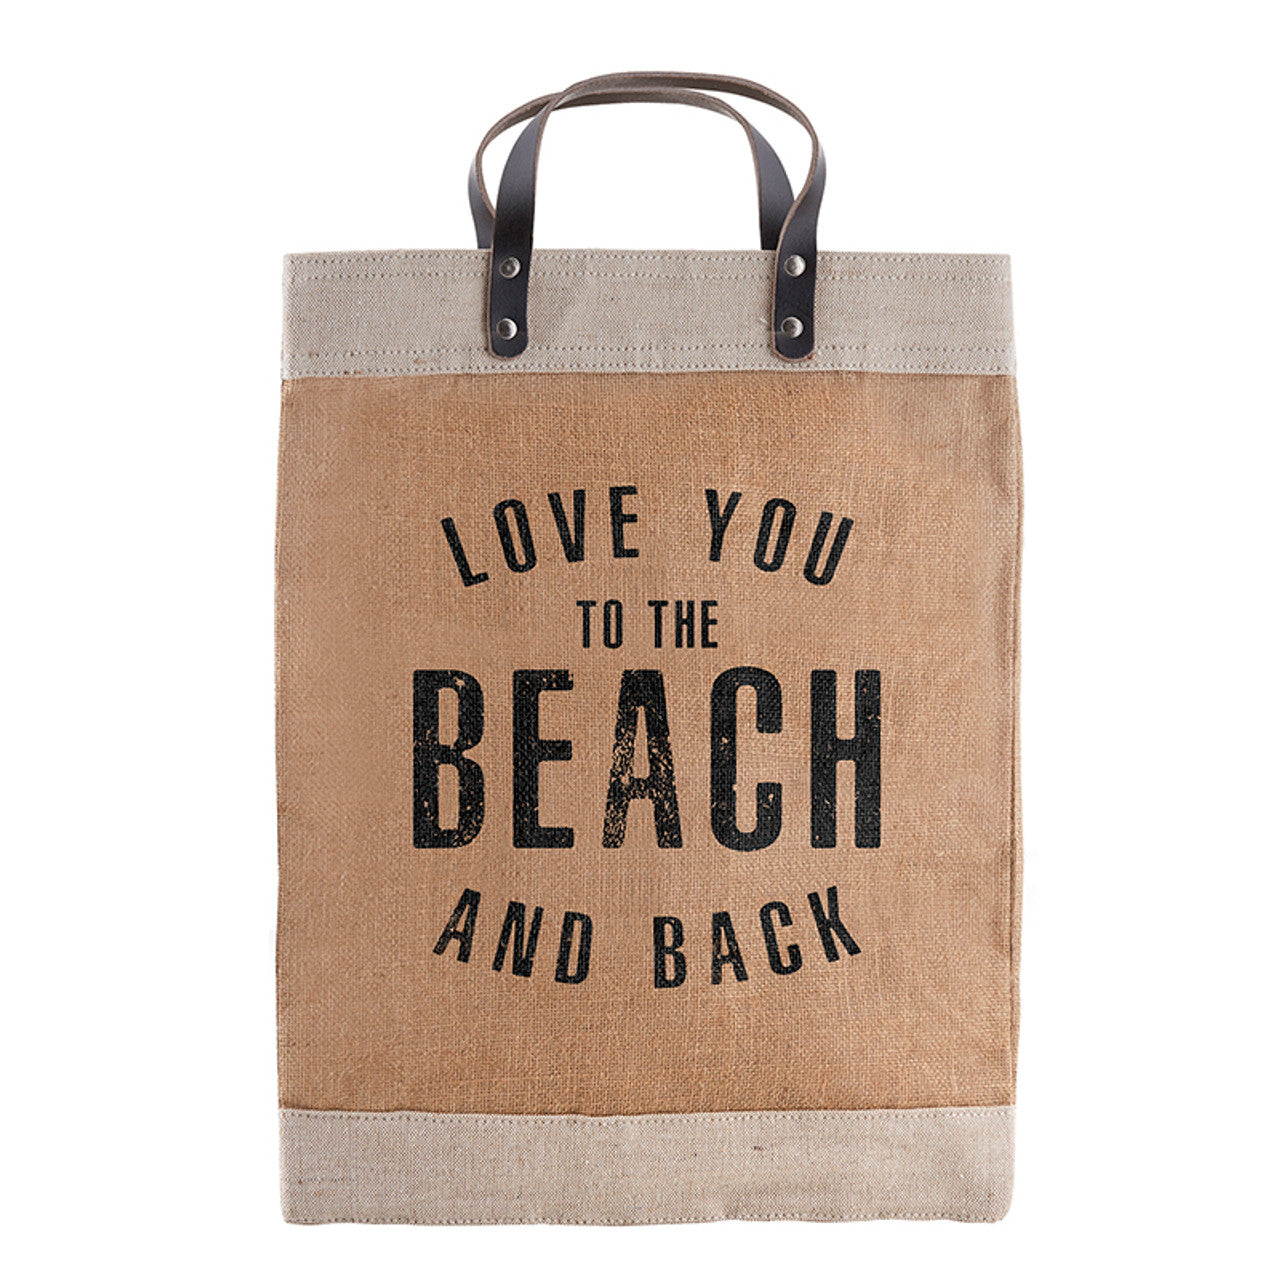 Farmer's Market Tote - LOVE YOU TO THE BEACH AND BACK